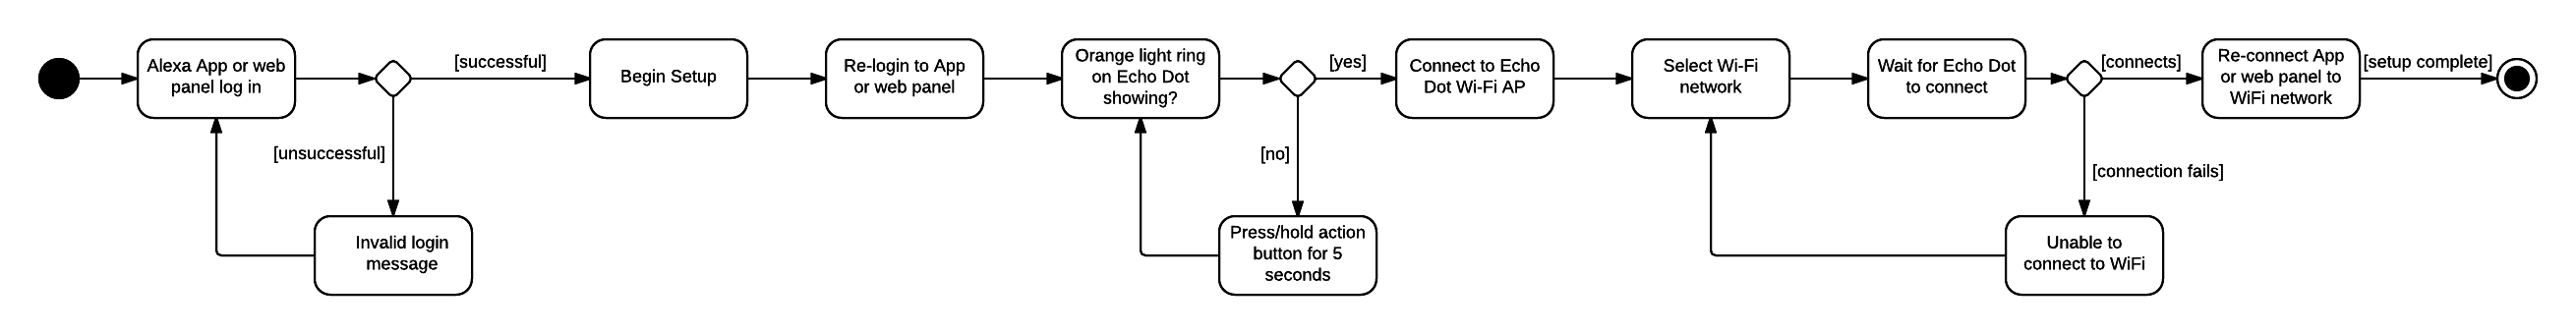 Second User Story Diagram